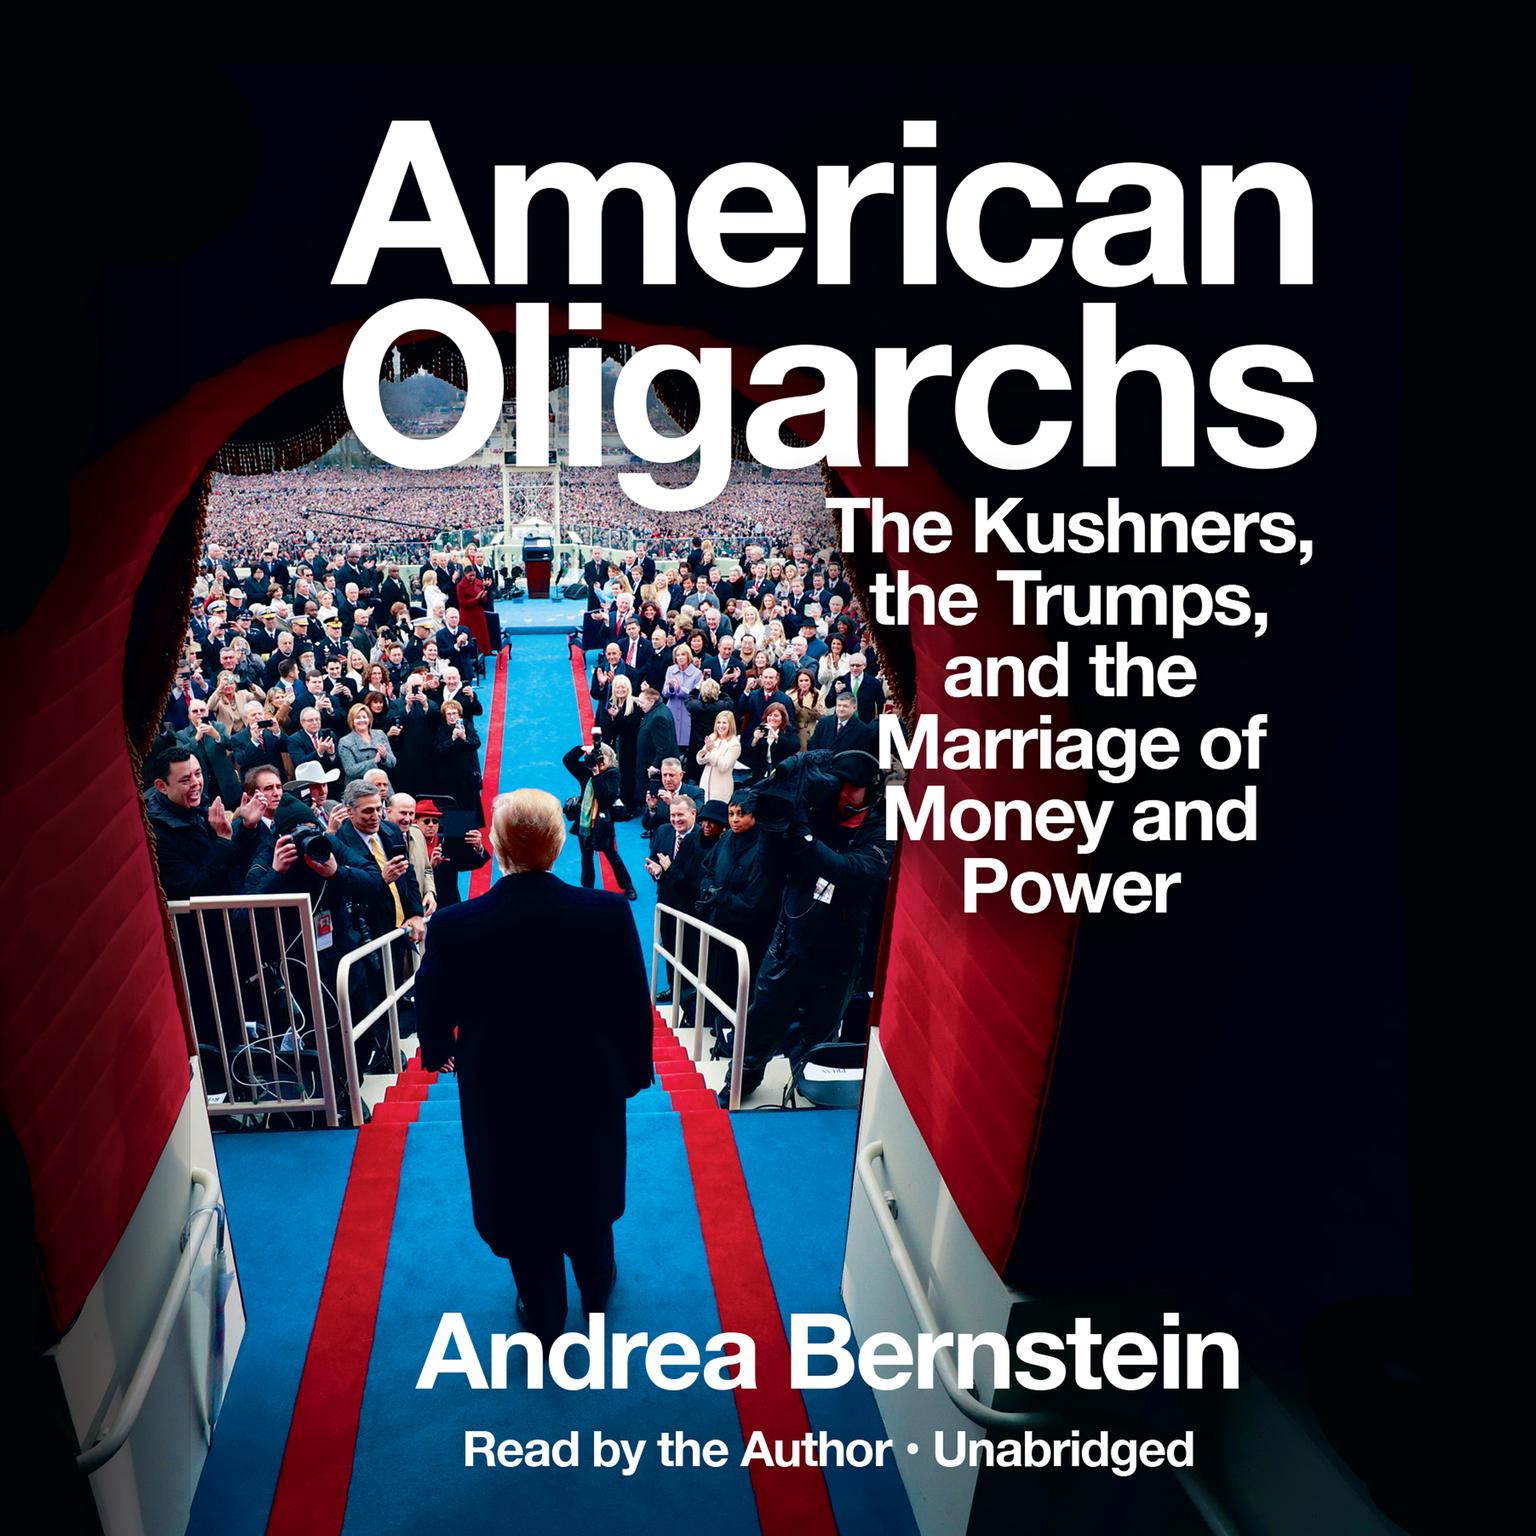 American Oligarchs: The Kushners, the Trumps, and the Marriage of Money and Power Audiobook, by Andrea Bernstein